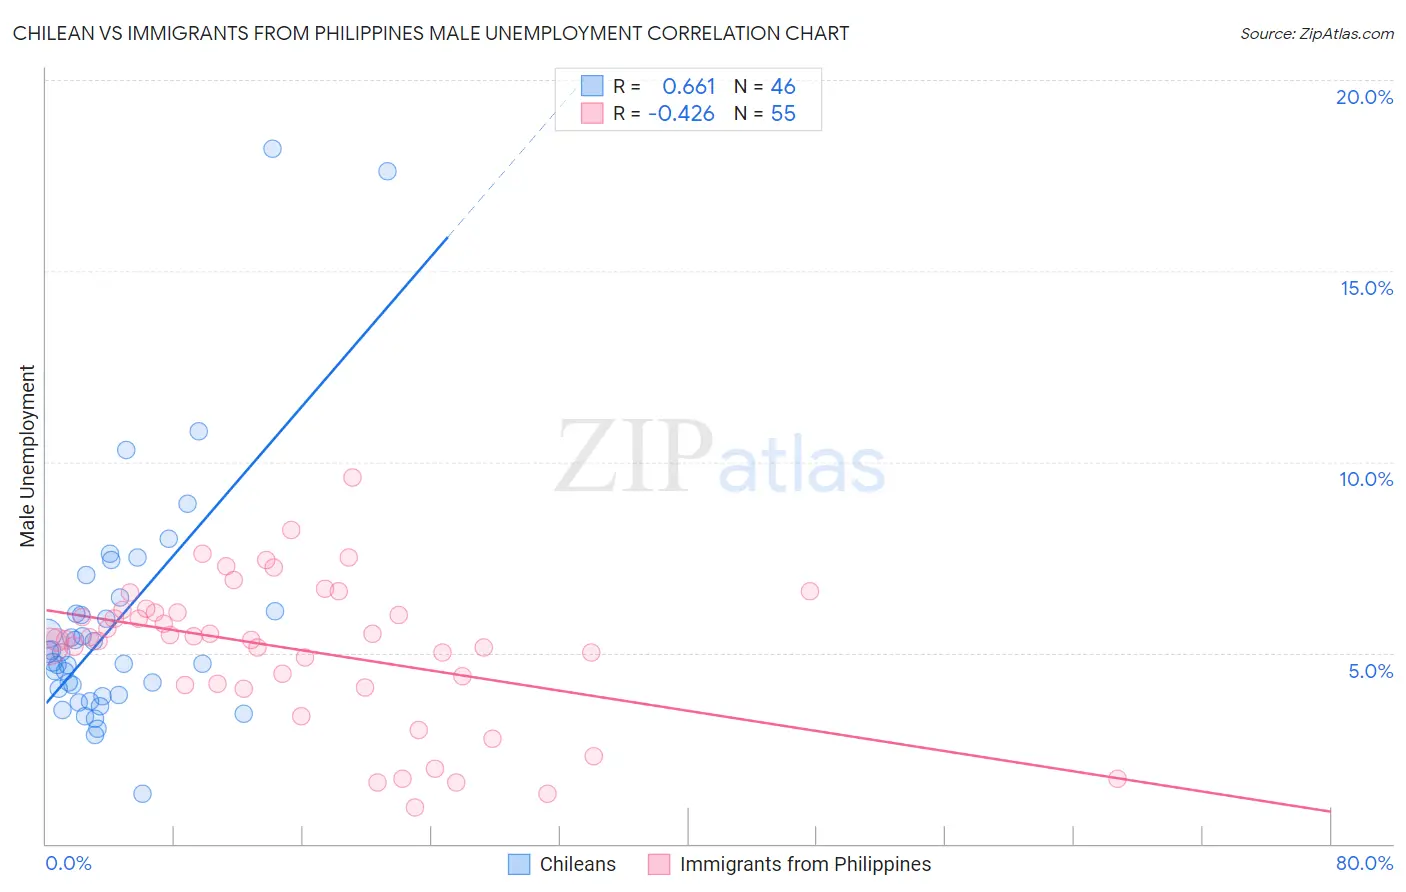 Chilean vs Immigrants from Philippines Male Unemployment